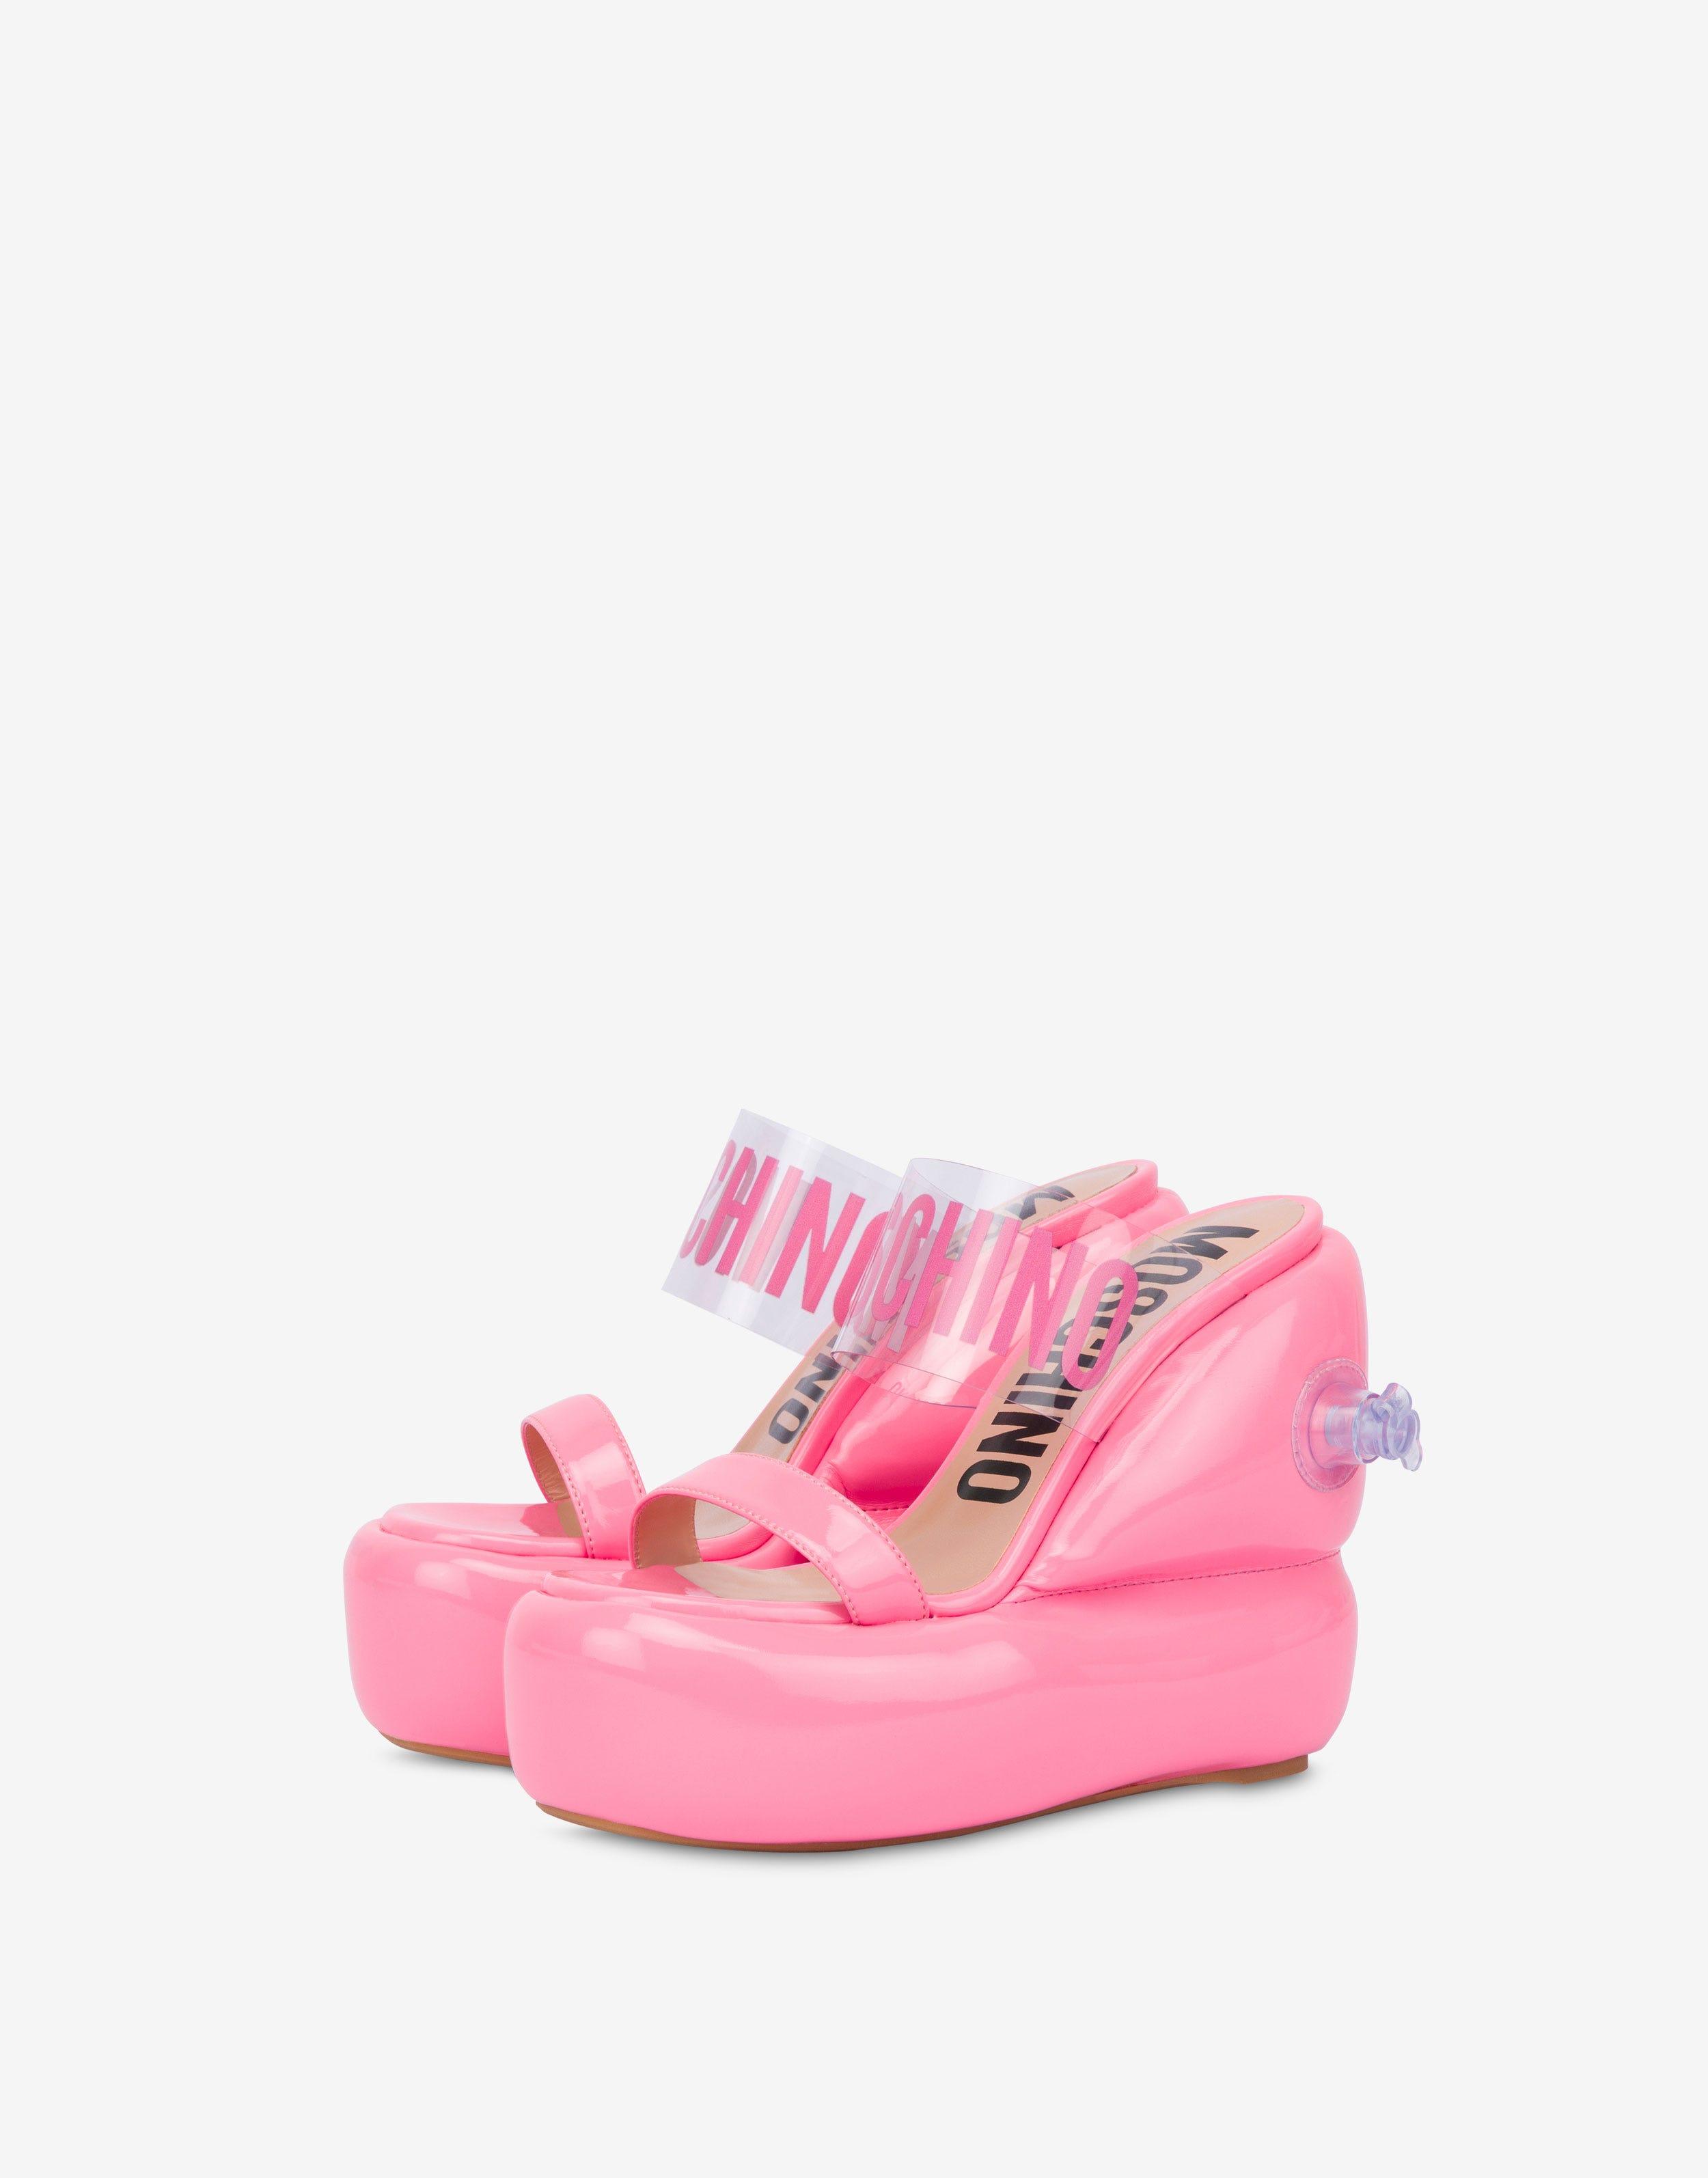 Moschino Inflatable Effect Wedge Sandals in Pink